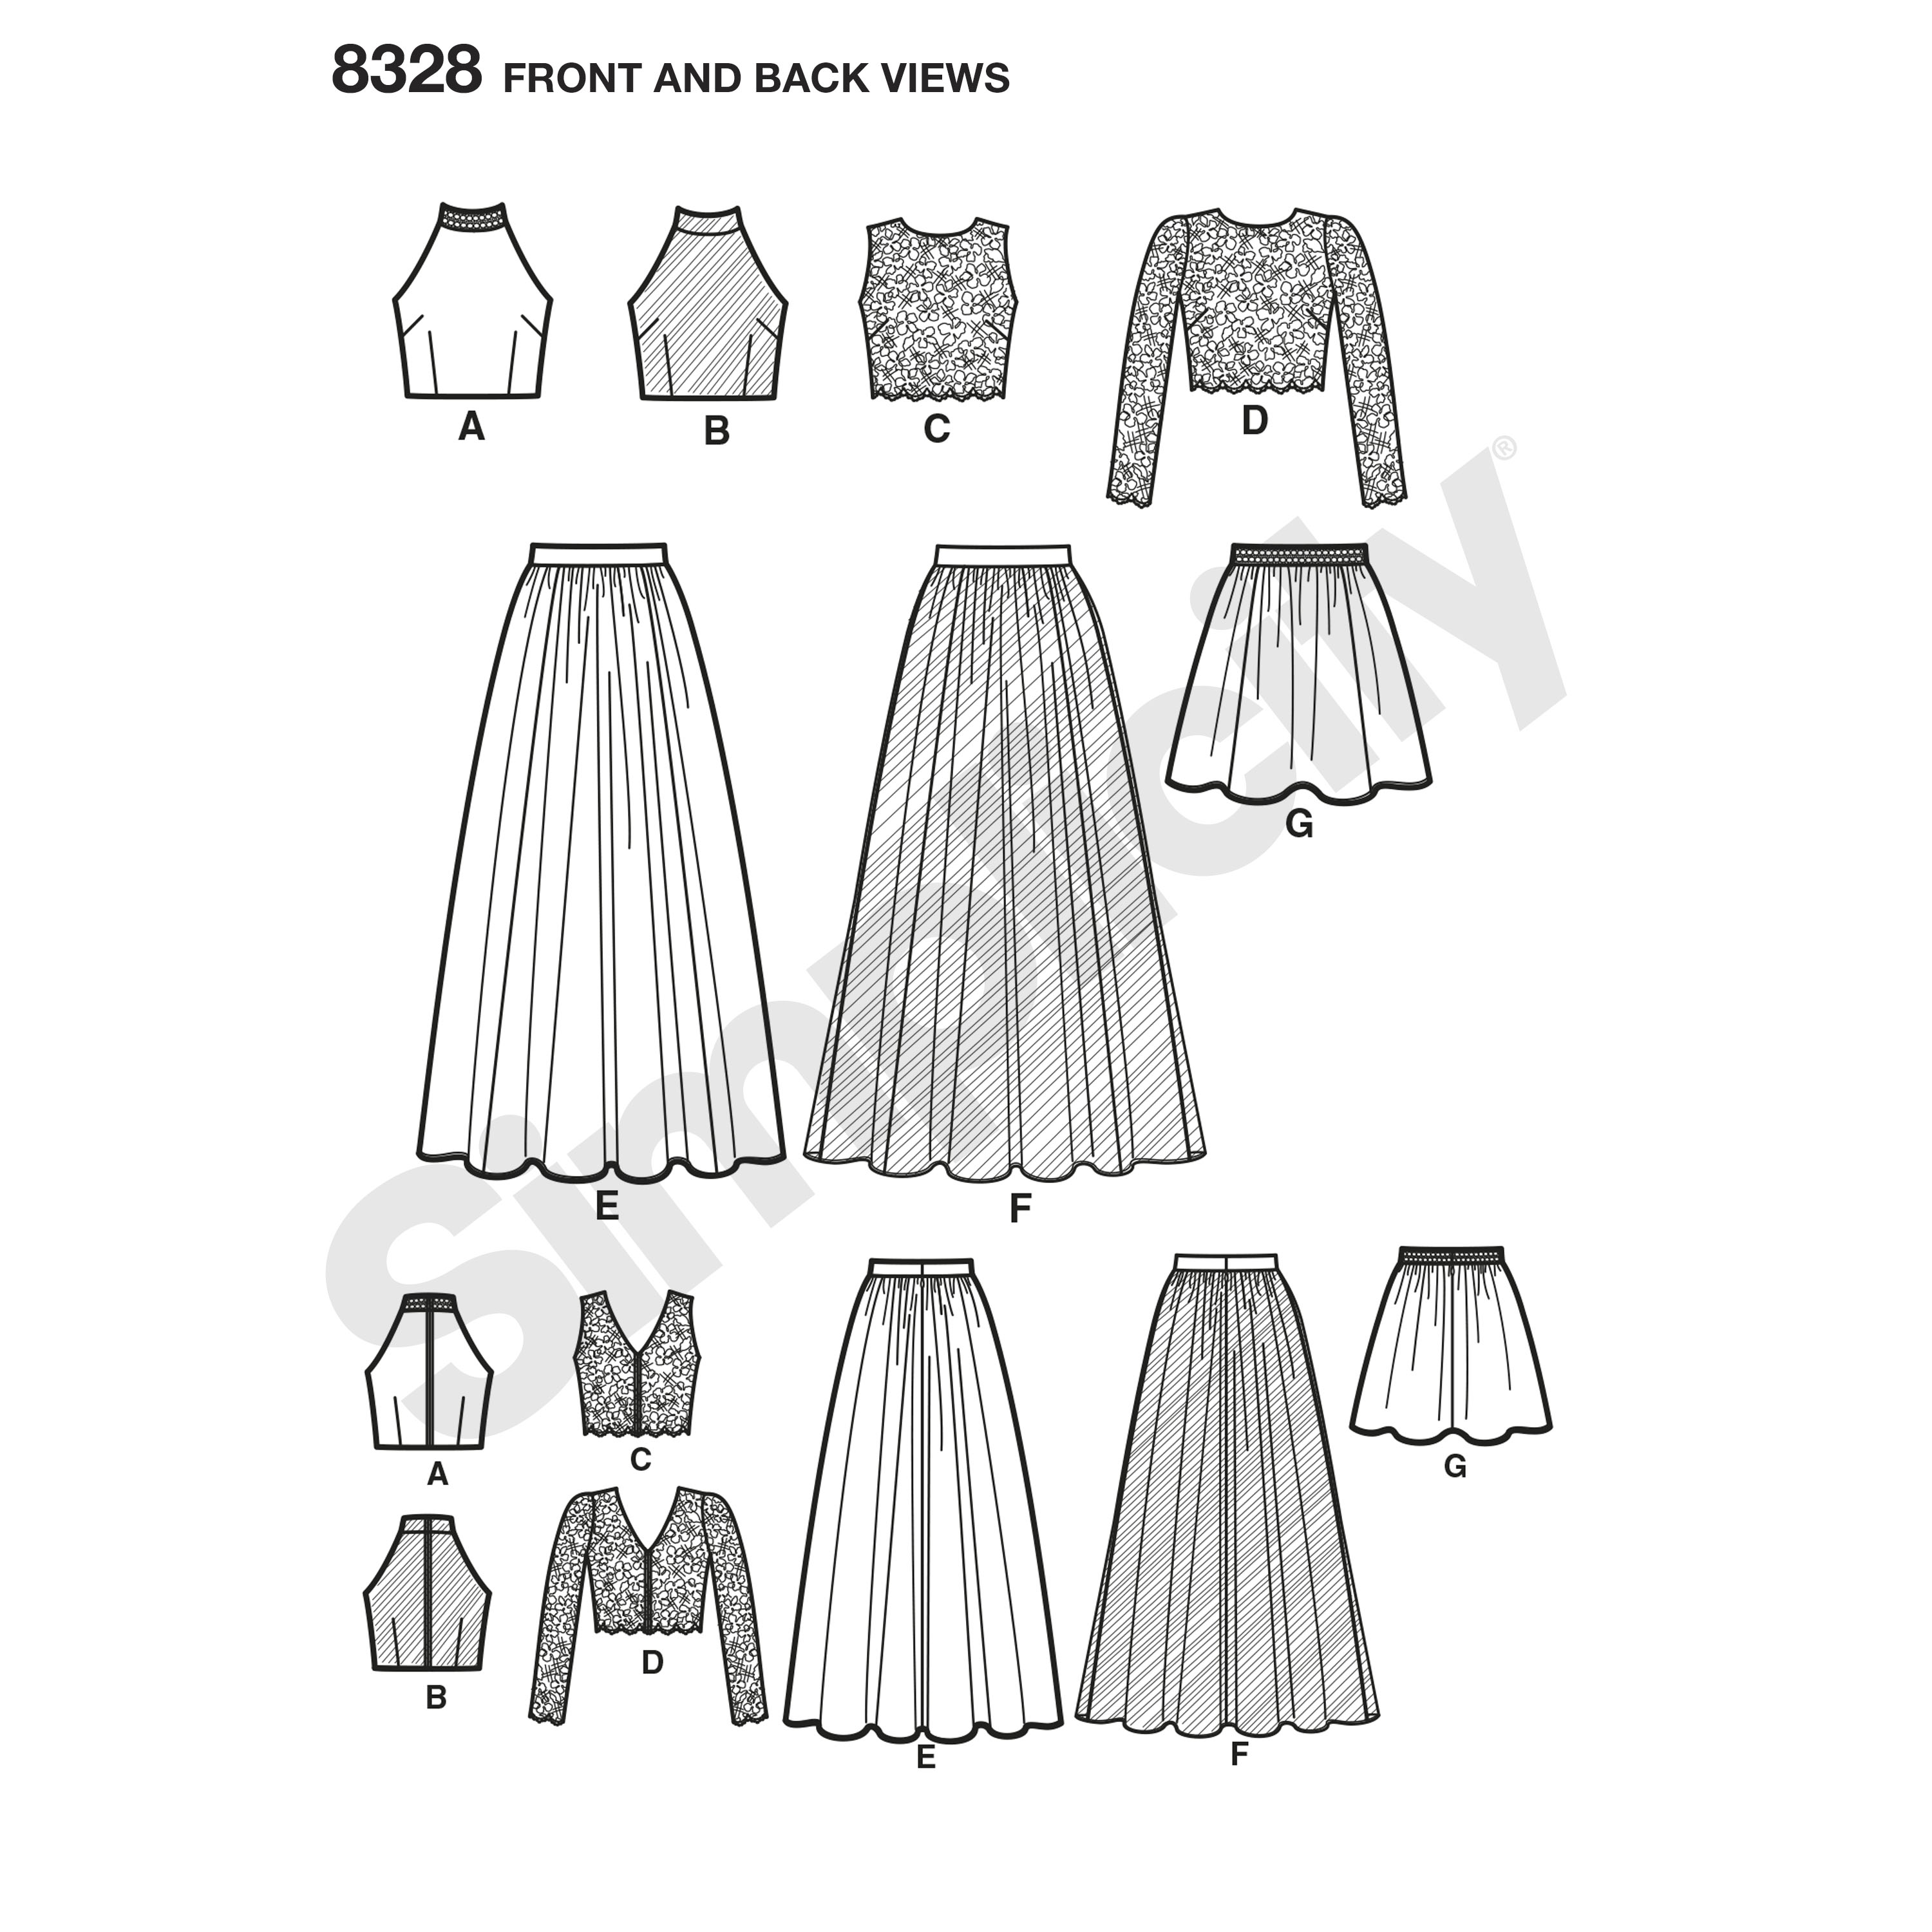 New Simplicity 8328 Pattern Special Occasion Tops and Skirts in 2 Lengths  for Women Misses Sizes 12 Through 20 Thesupplyloft1 